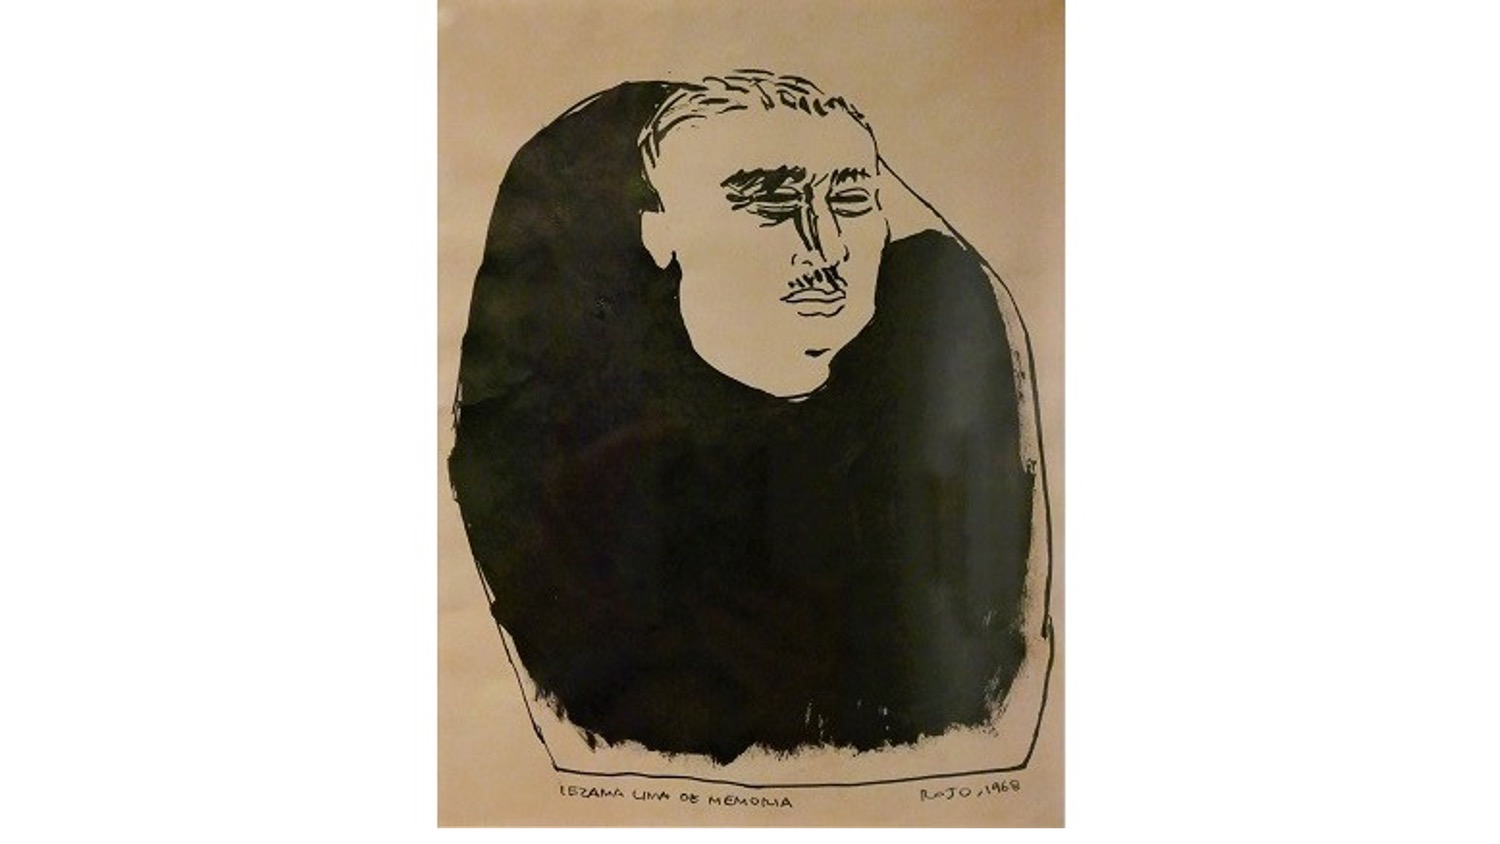 Vicente Rojo. "Portrait of Lezama Lima", 1968 (Editorial Era publishes "Paradise" considered first edition). Original ink drawing on paper. 30 x 21 cm